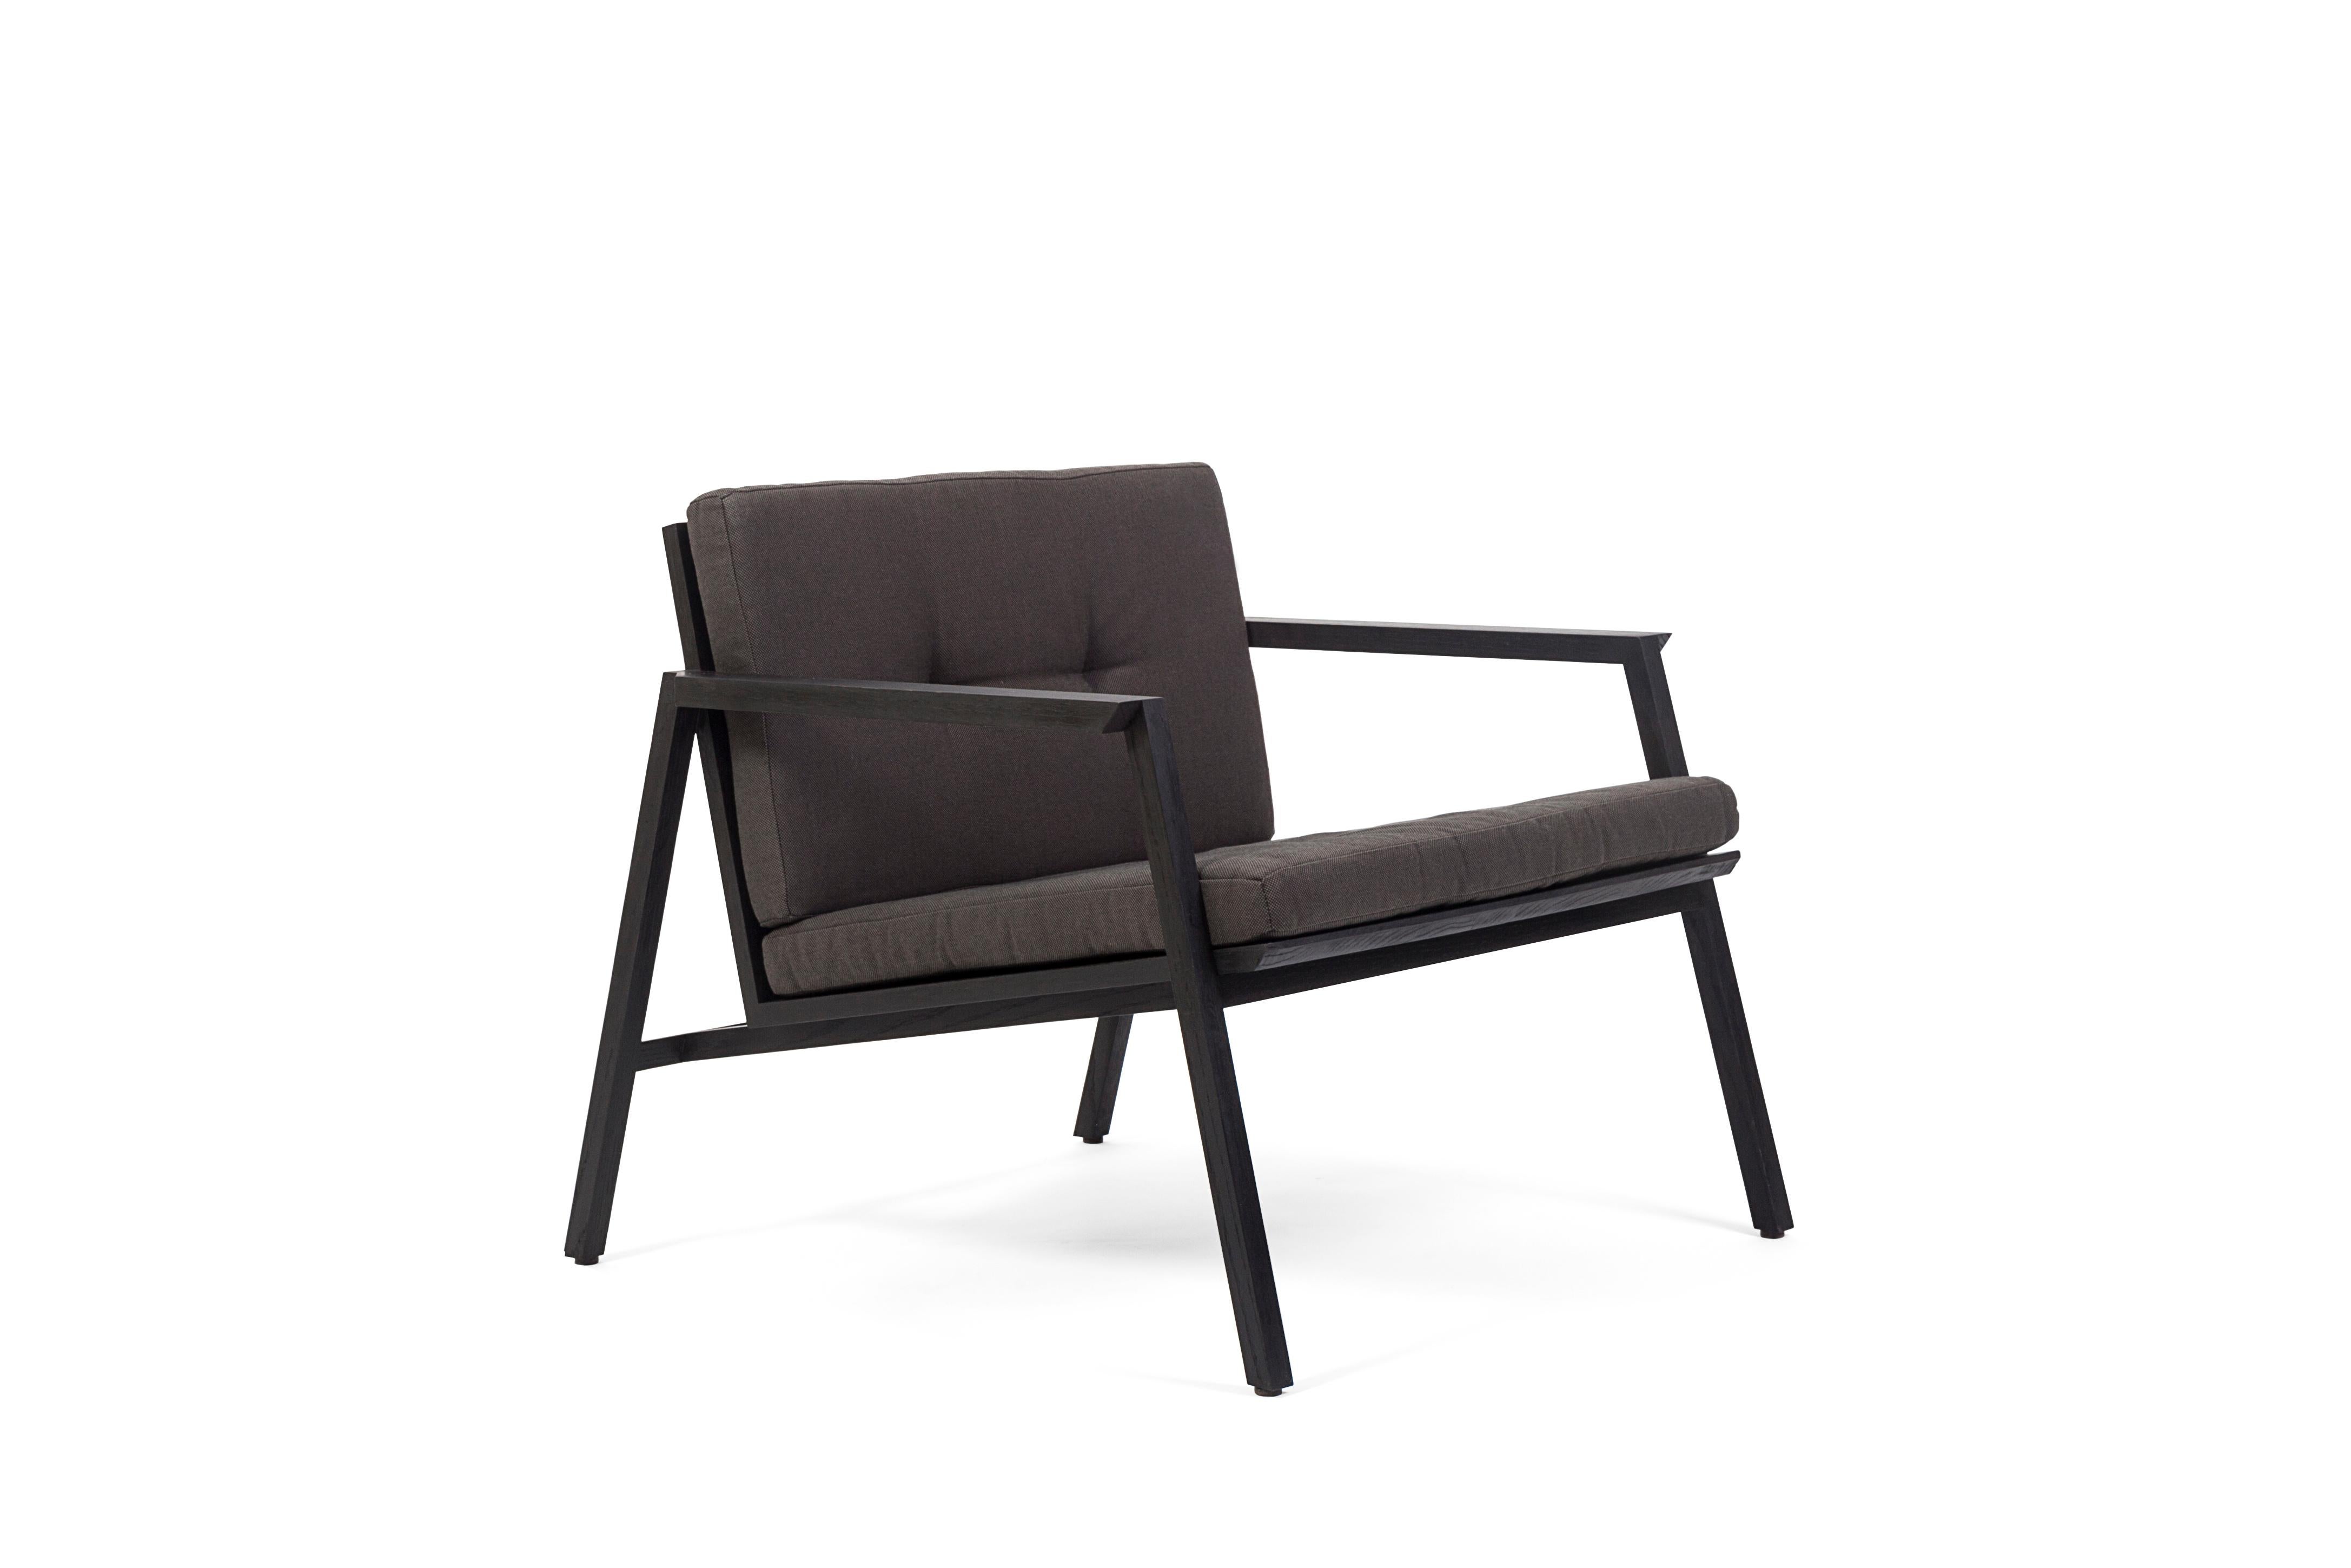 Tumbona Dedo, Mexican Contemporary Lounge Chair by Emiliano Molina for CUCHARA For Sale 2